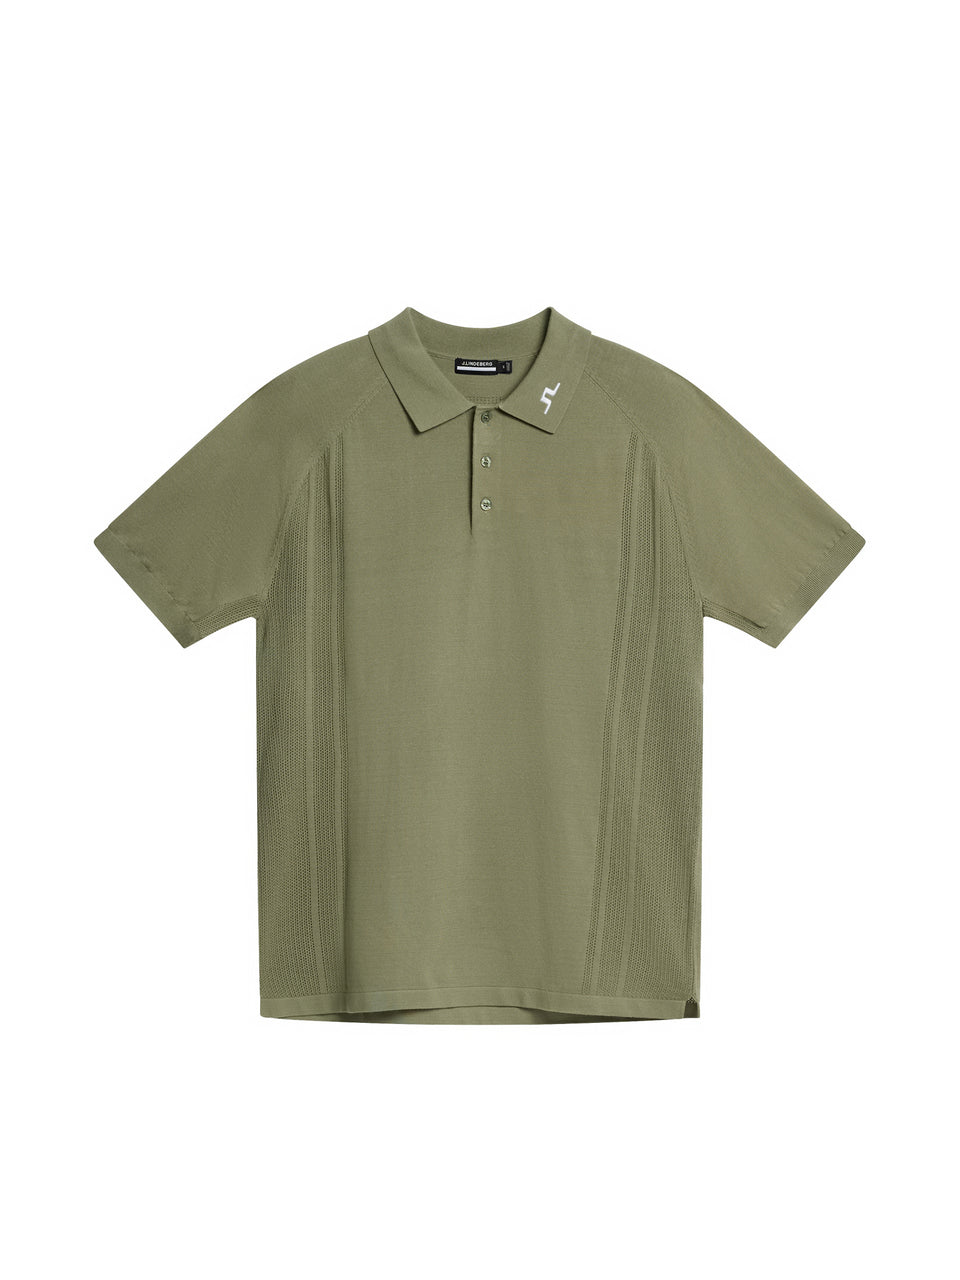 Martines Knitted Shirt / Oil Green